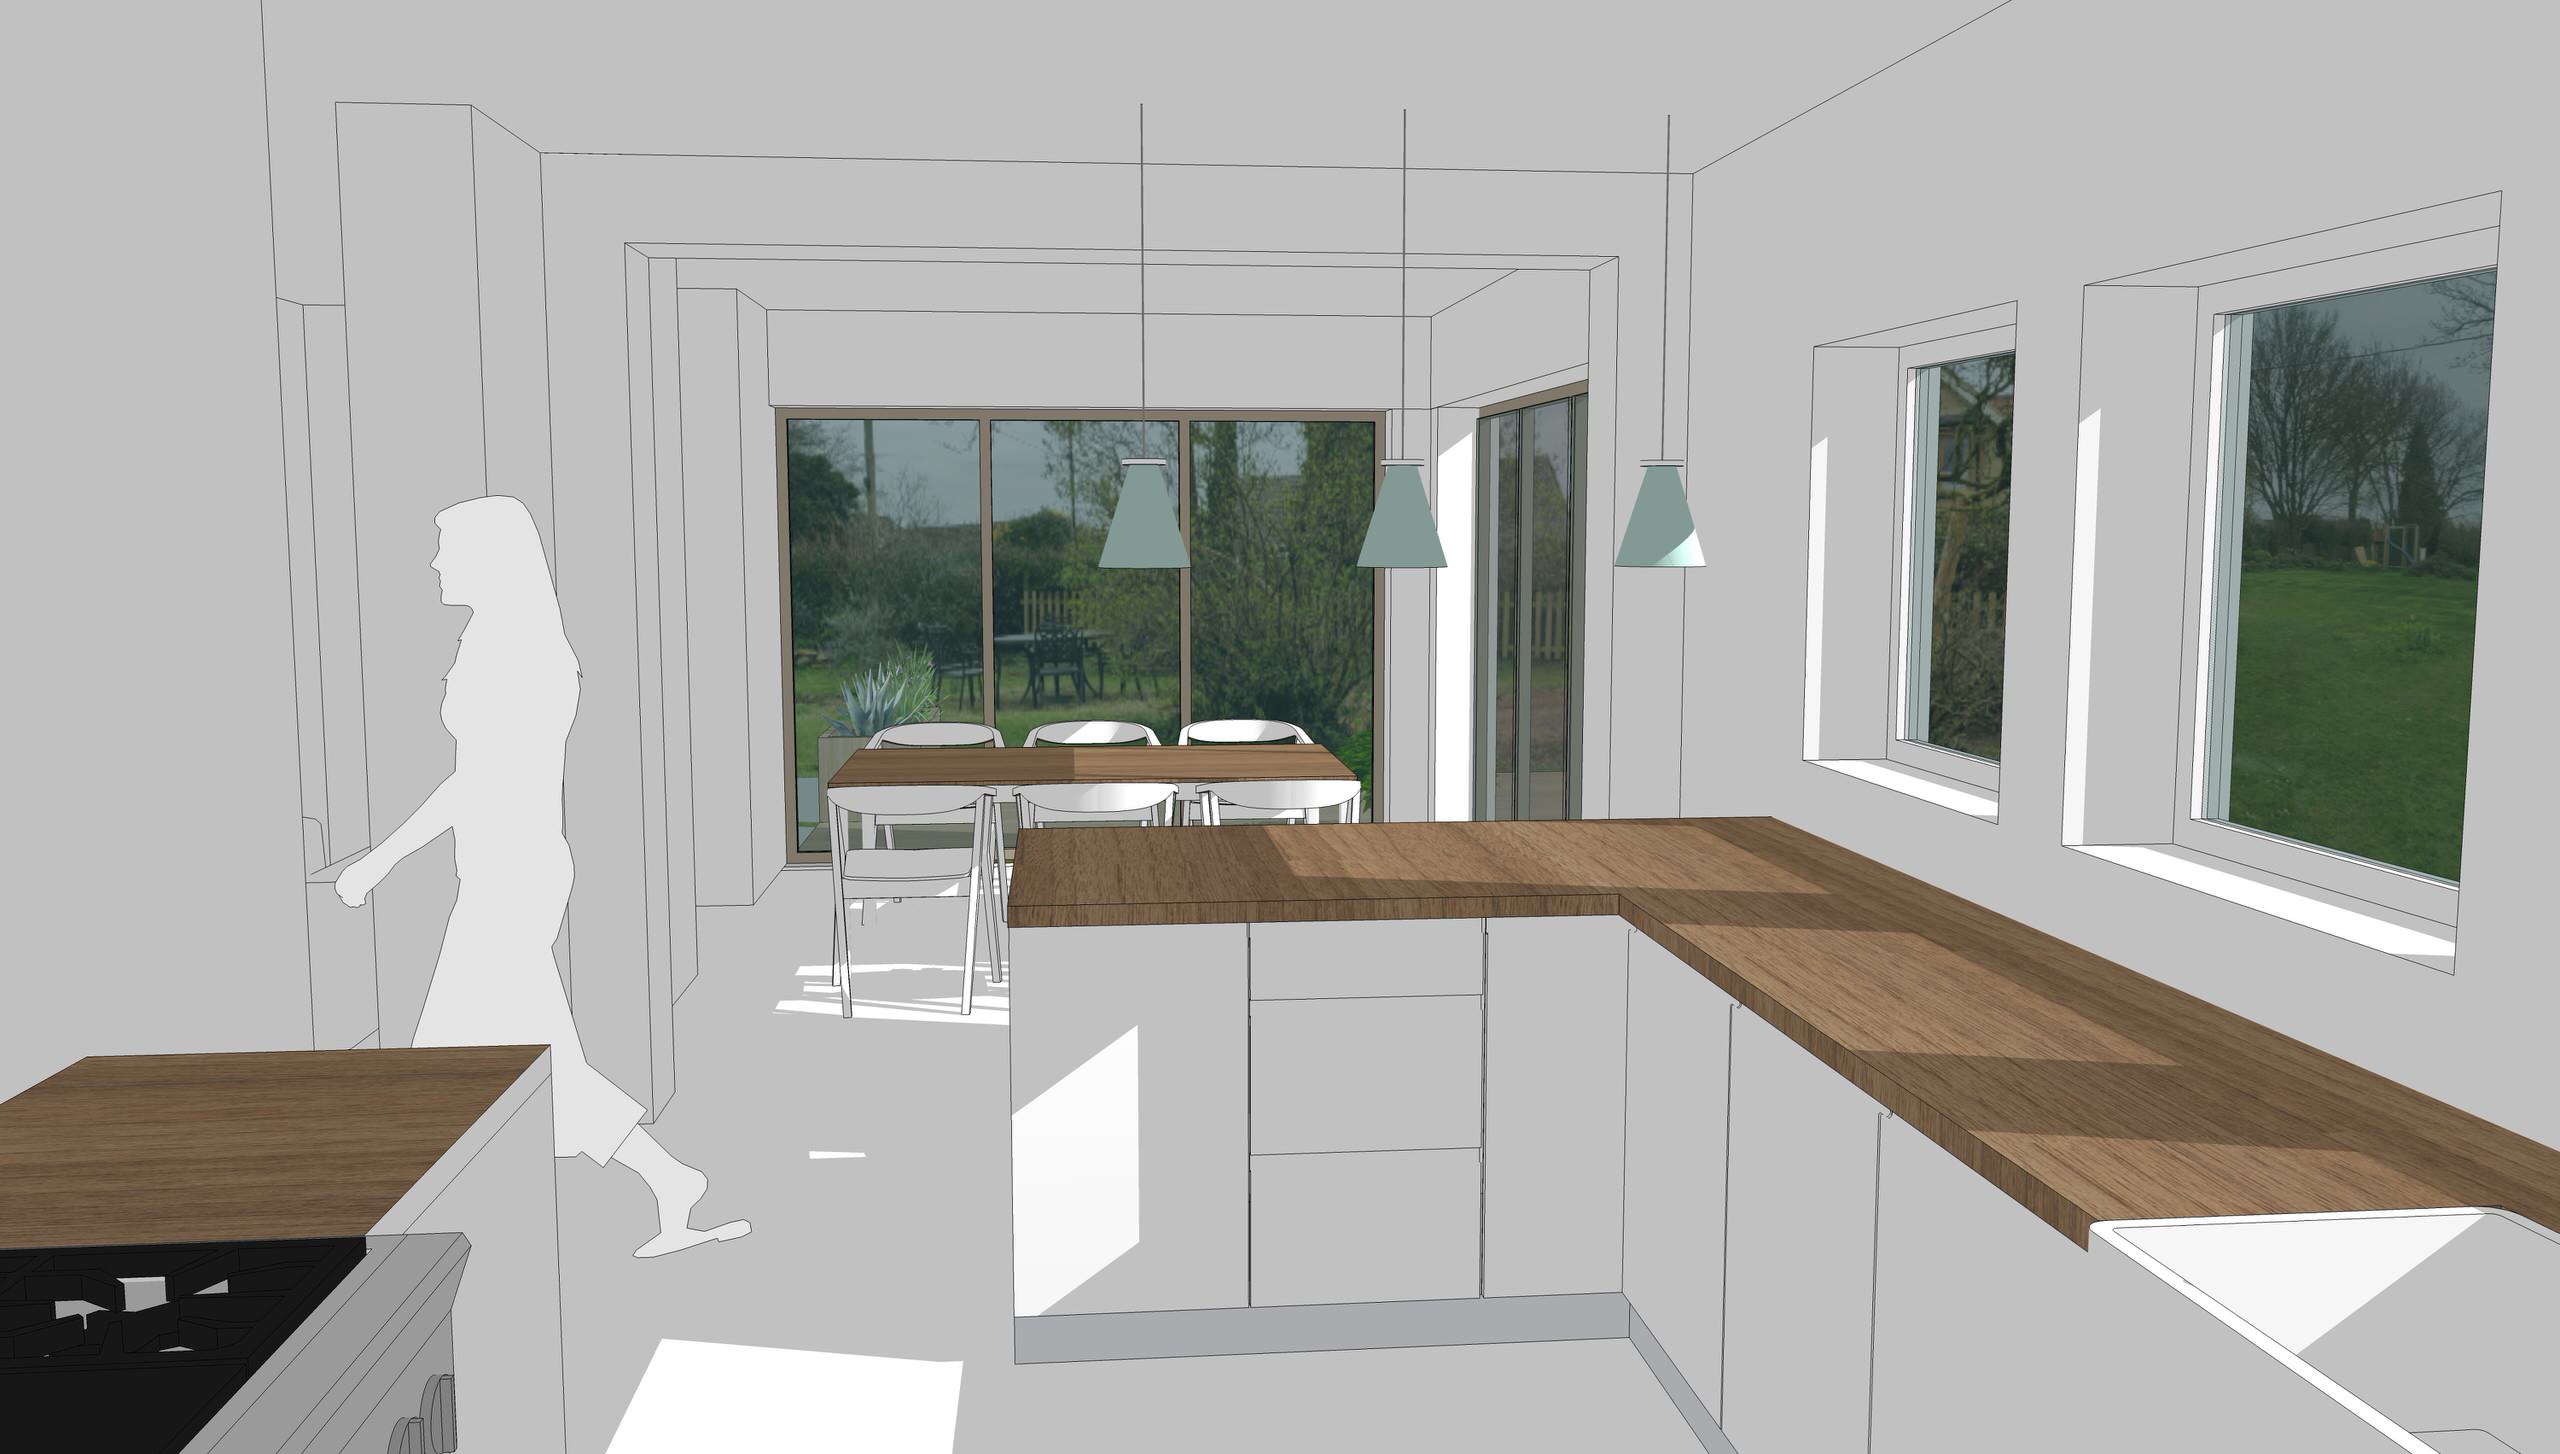 View of open-plan kitchen and dining space